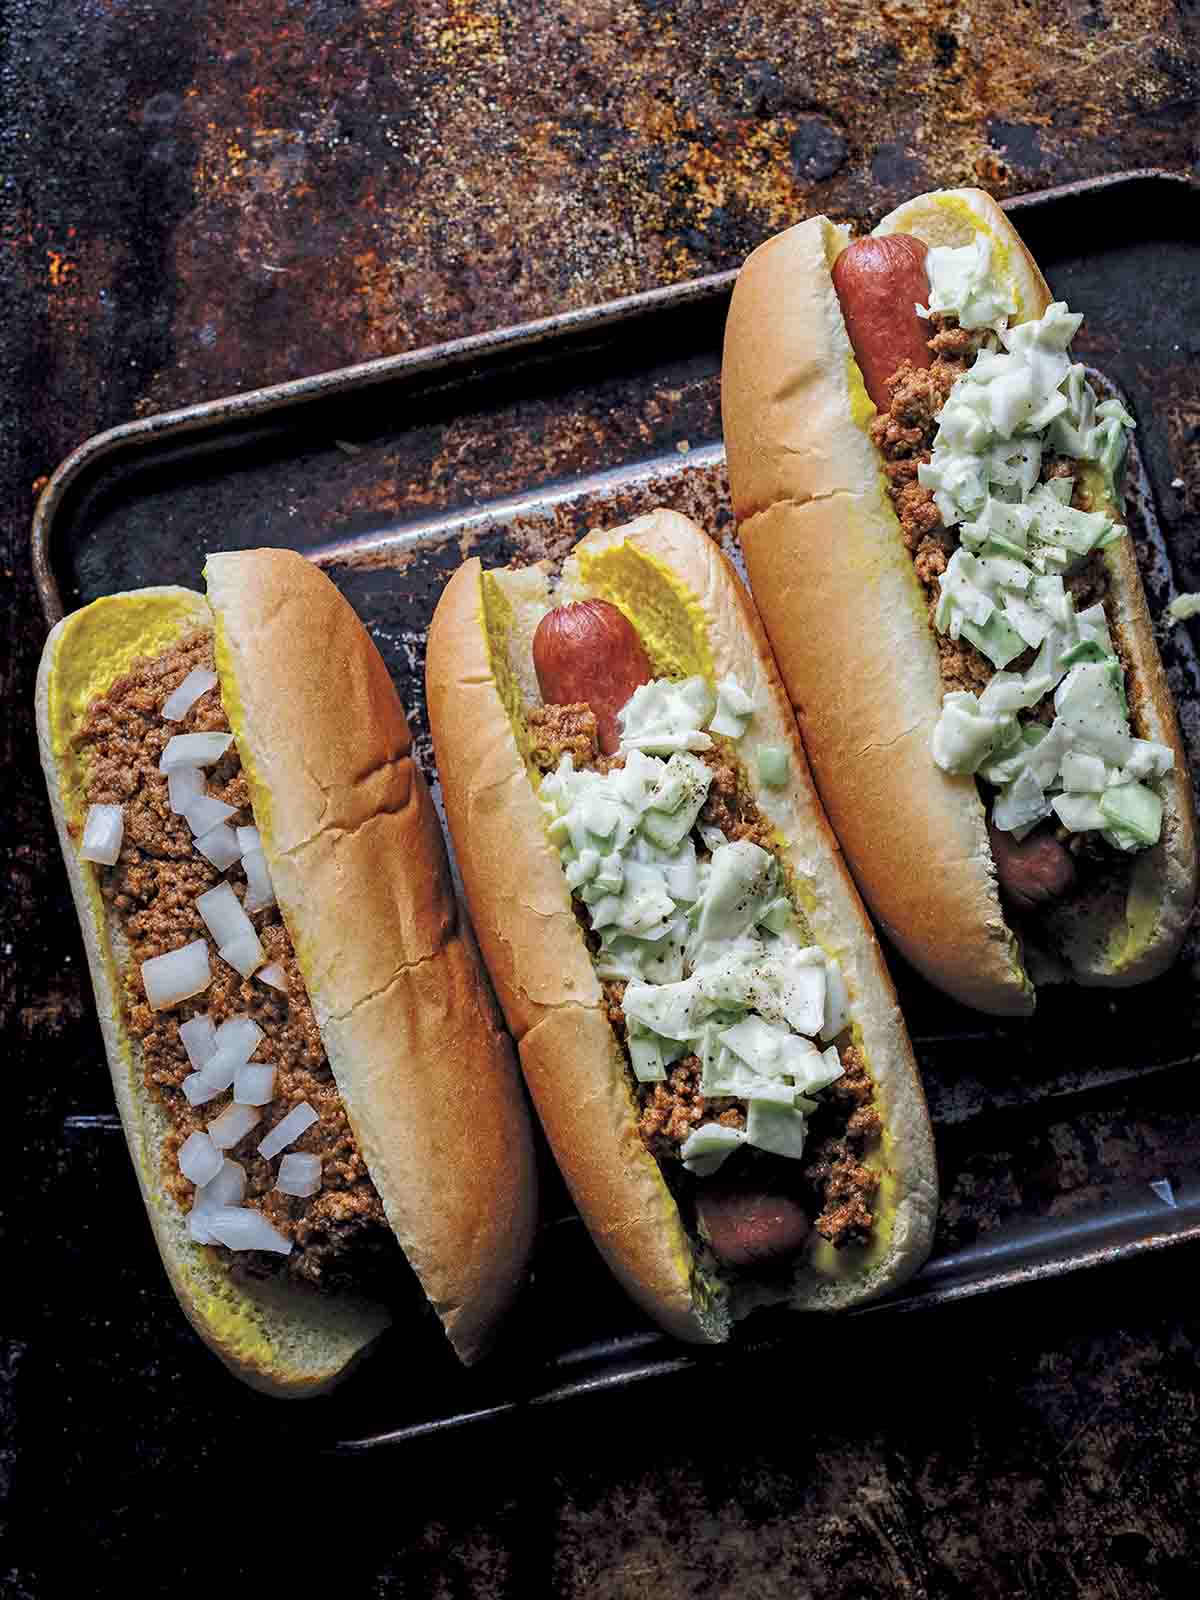 One chili bun and two slaw dogs on a rimmed baking sheet.